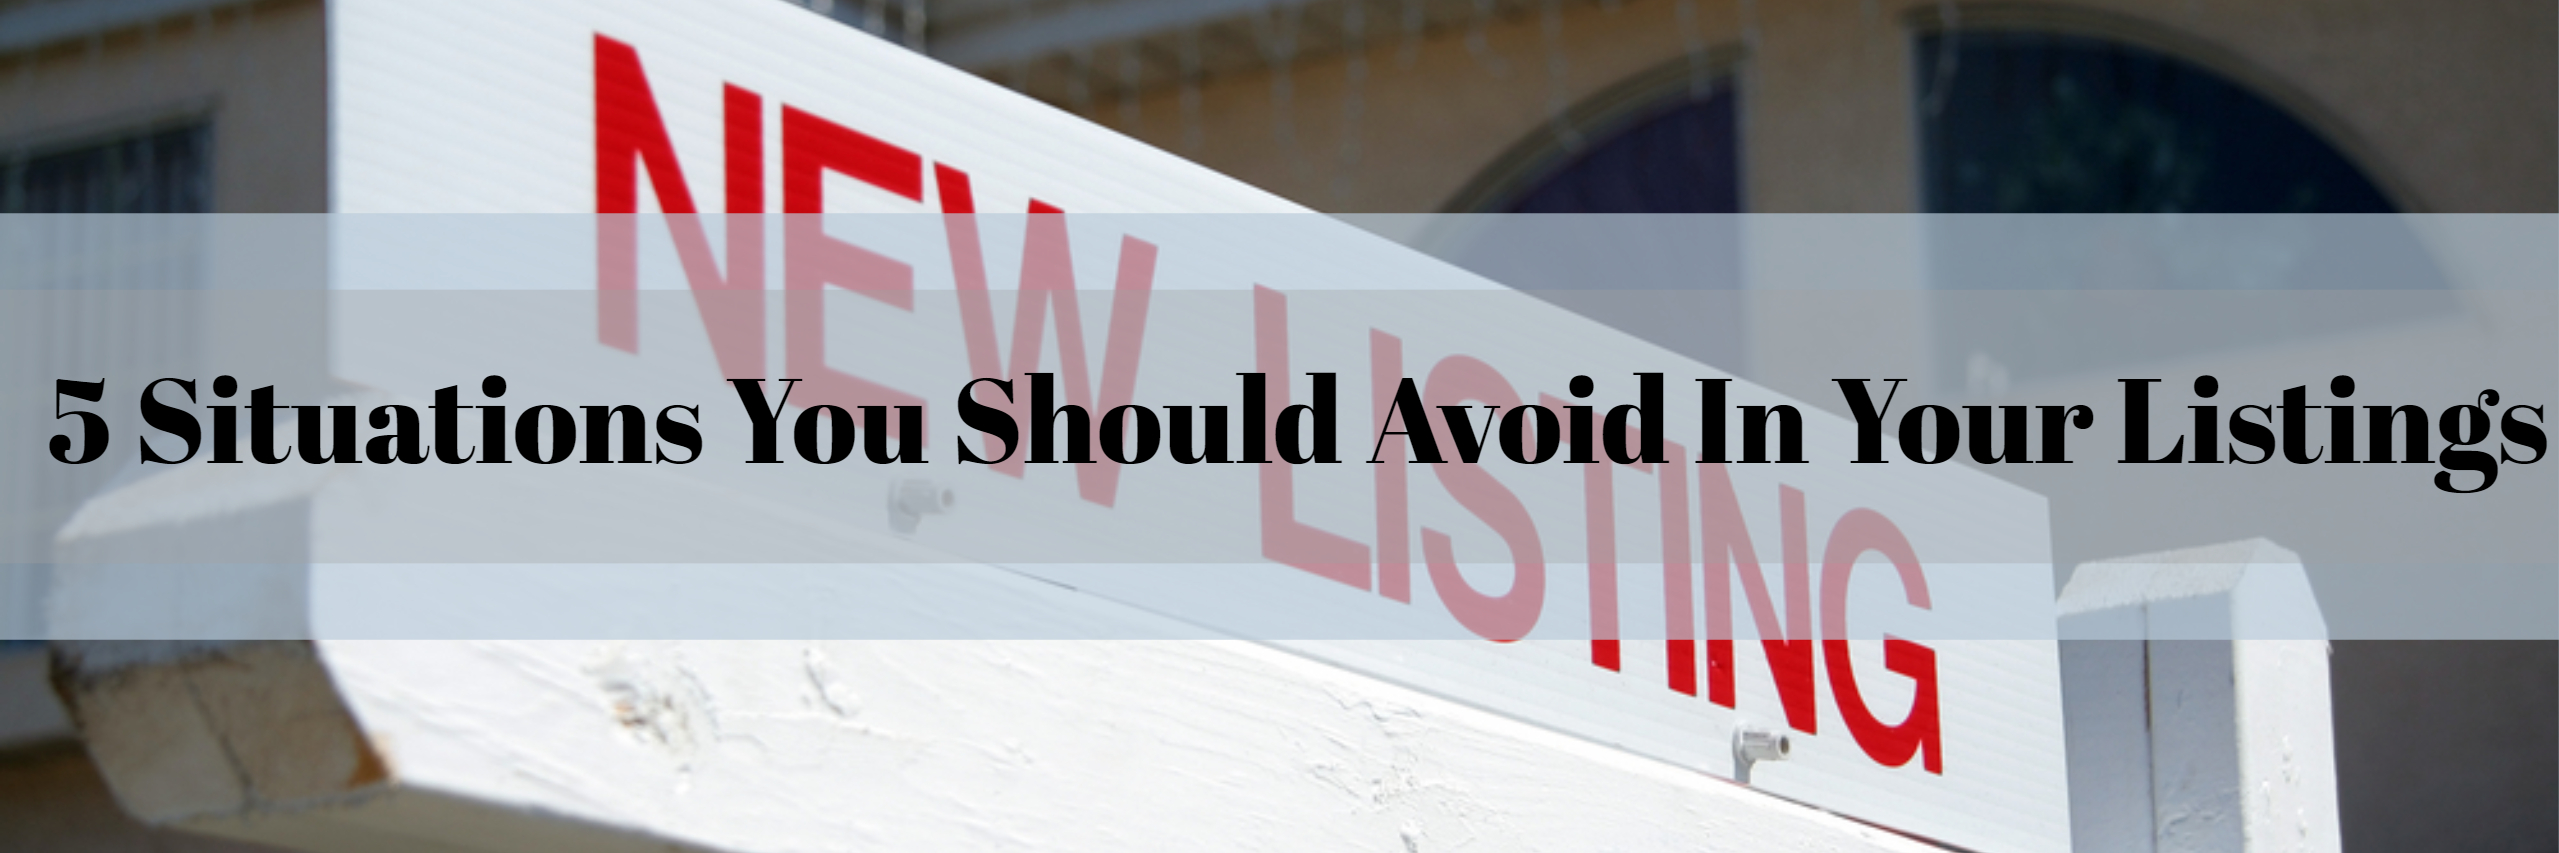 5 Situations You Should Avoid In Your Listings best real estate agent in Los Angeles top producer Paul Argueta